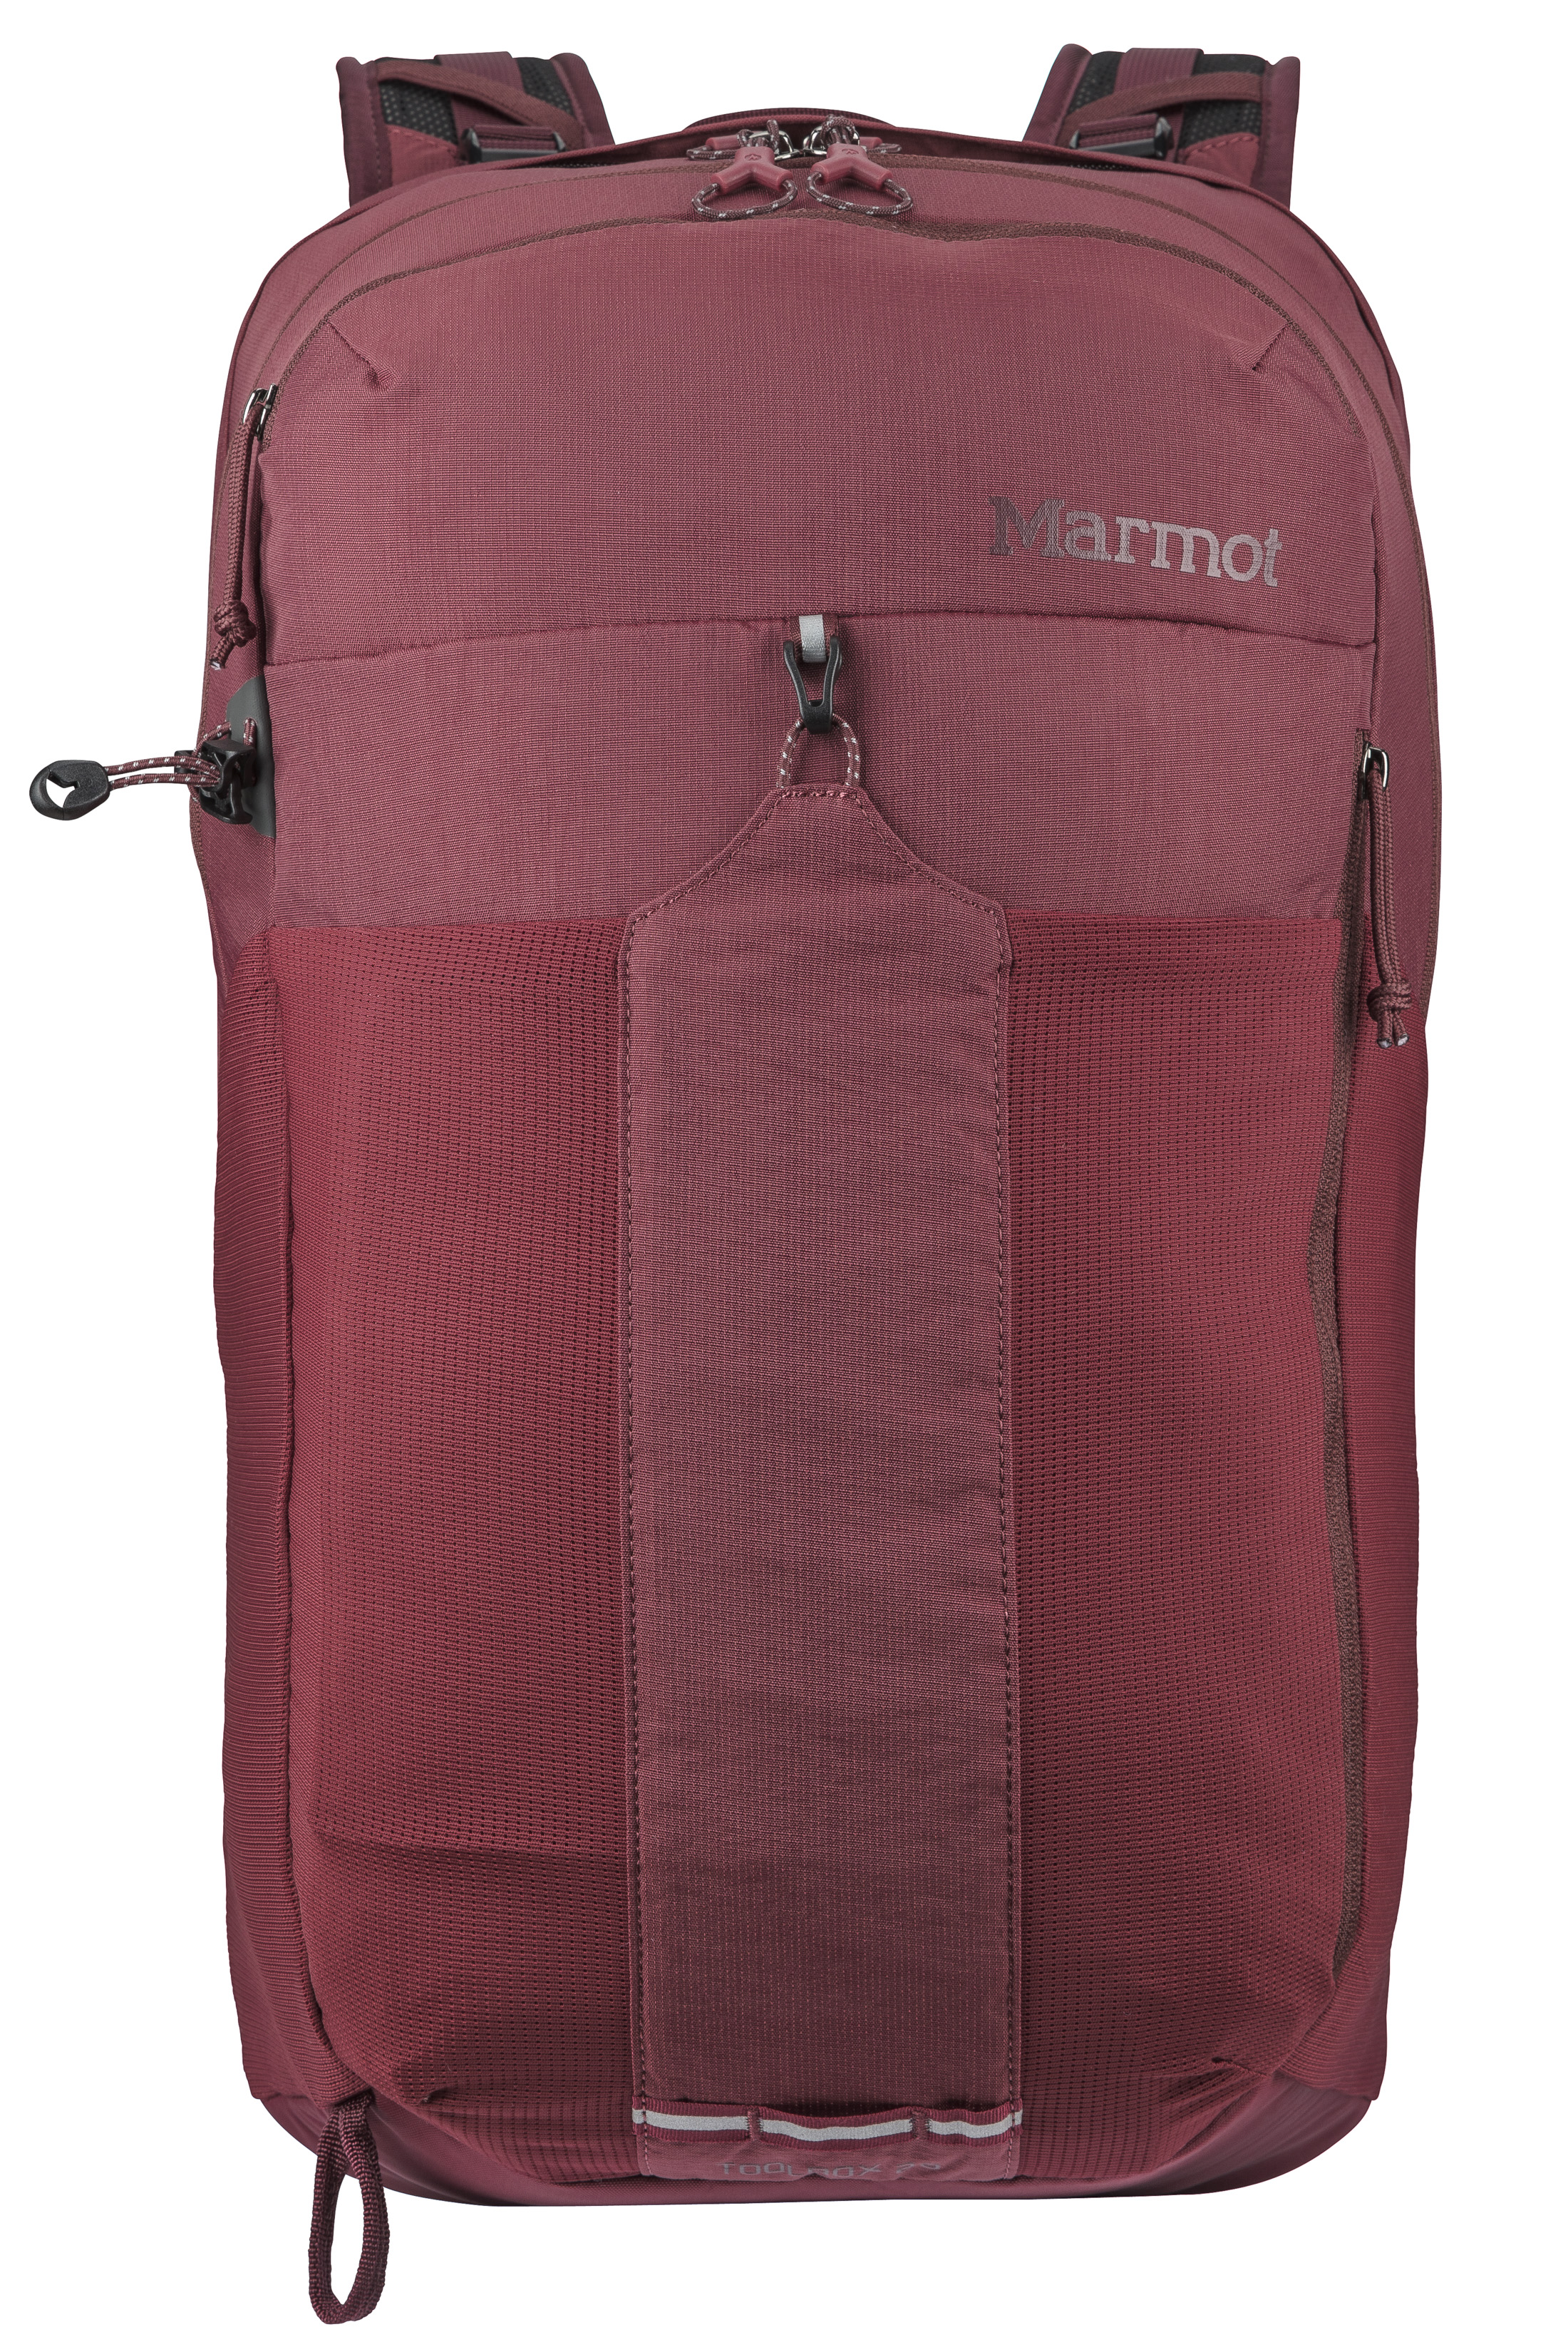 Marmot Tool Box 30l Pack 39170 001 One 22 Off With Free S H Campsaver